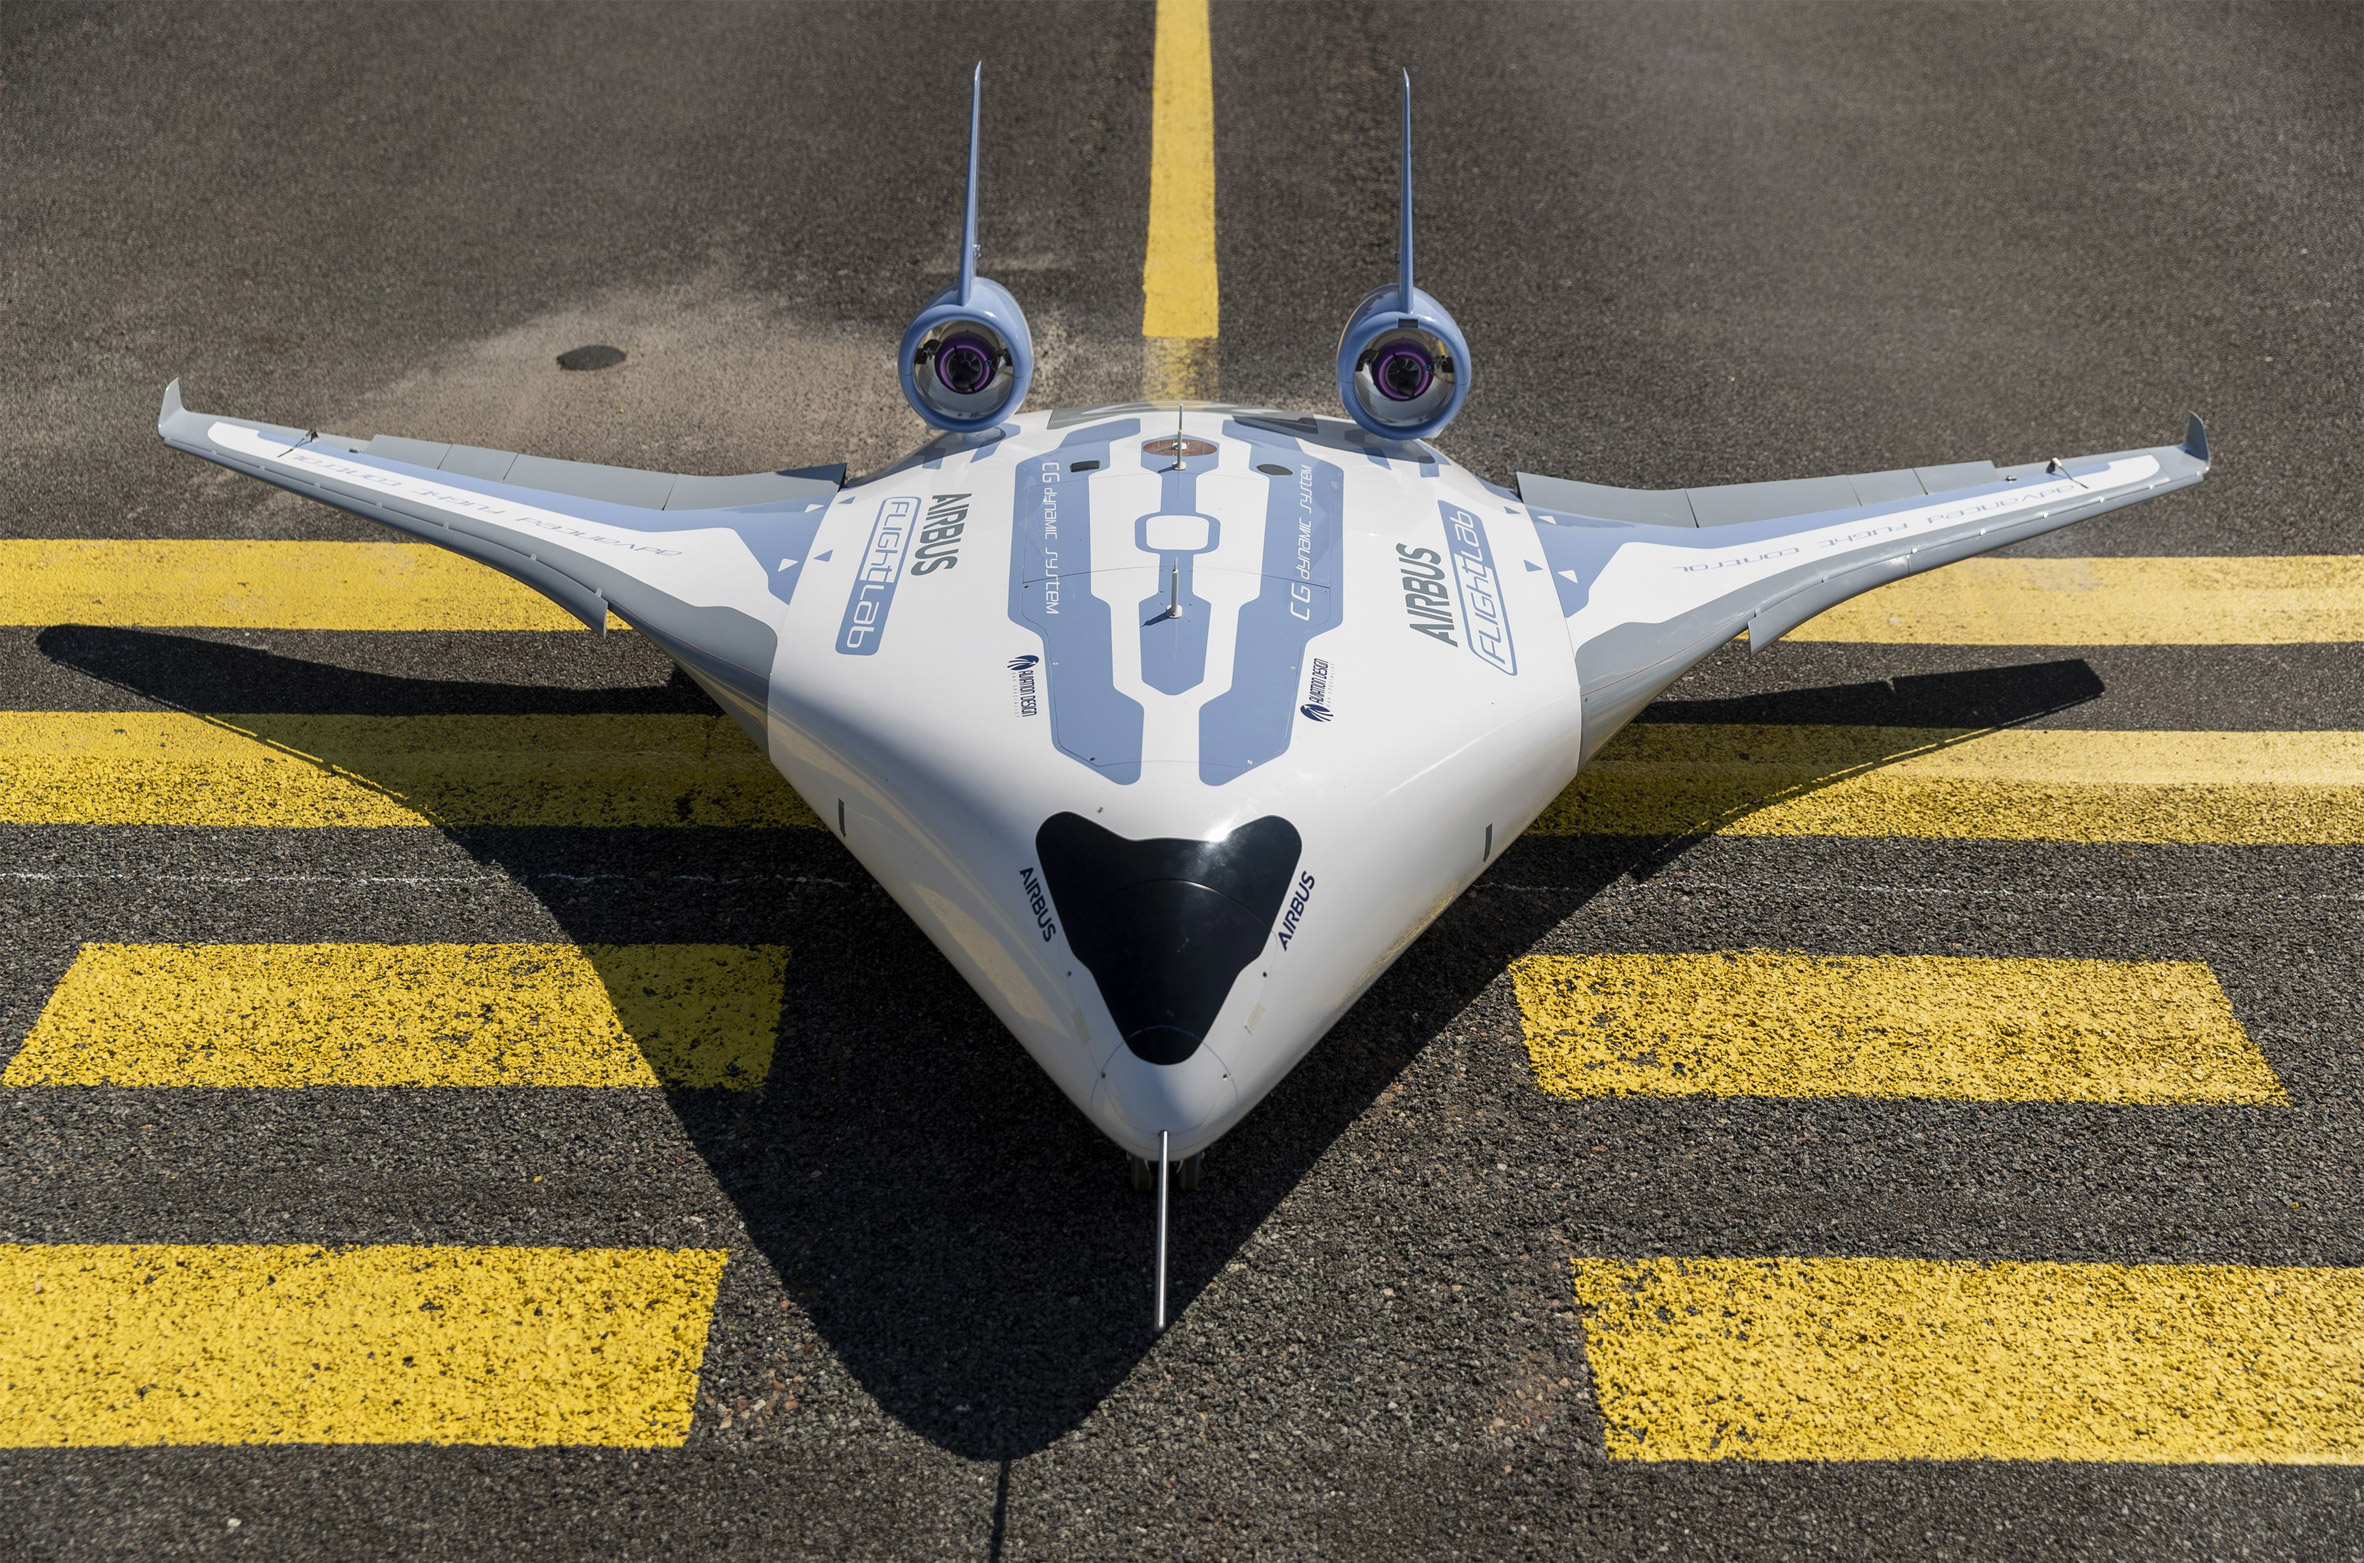 Airbus reveals fuel-saving Maveric aircraft with blended wing body